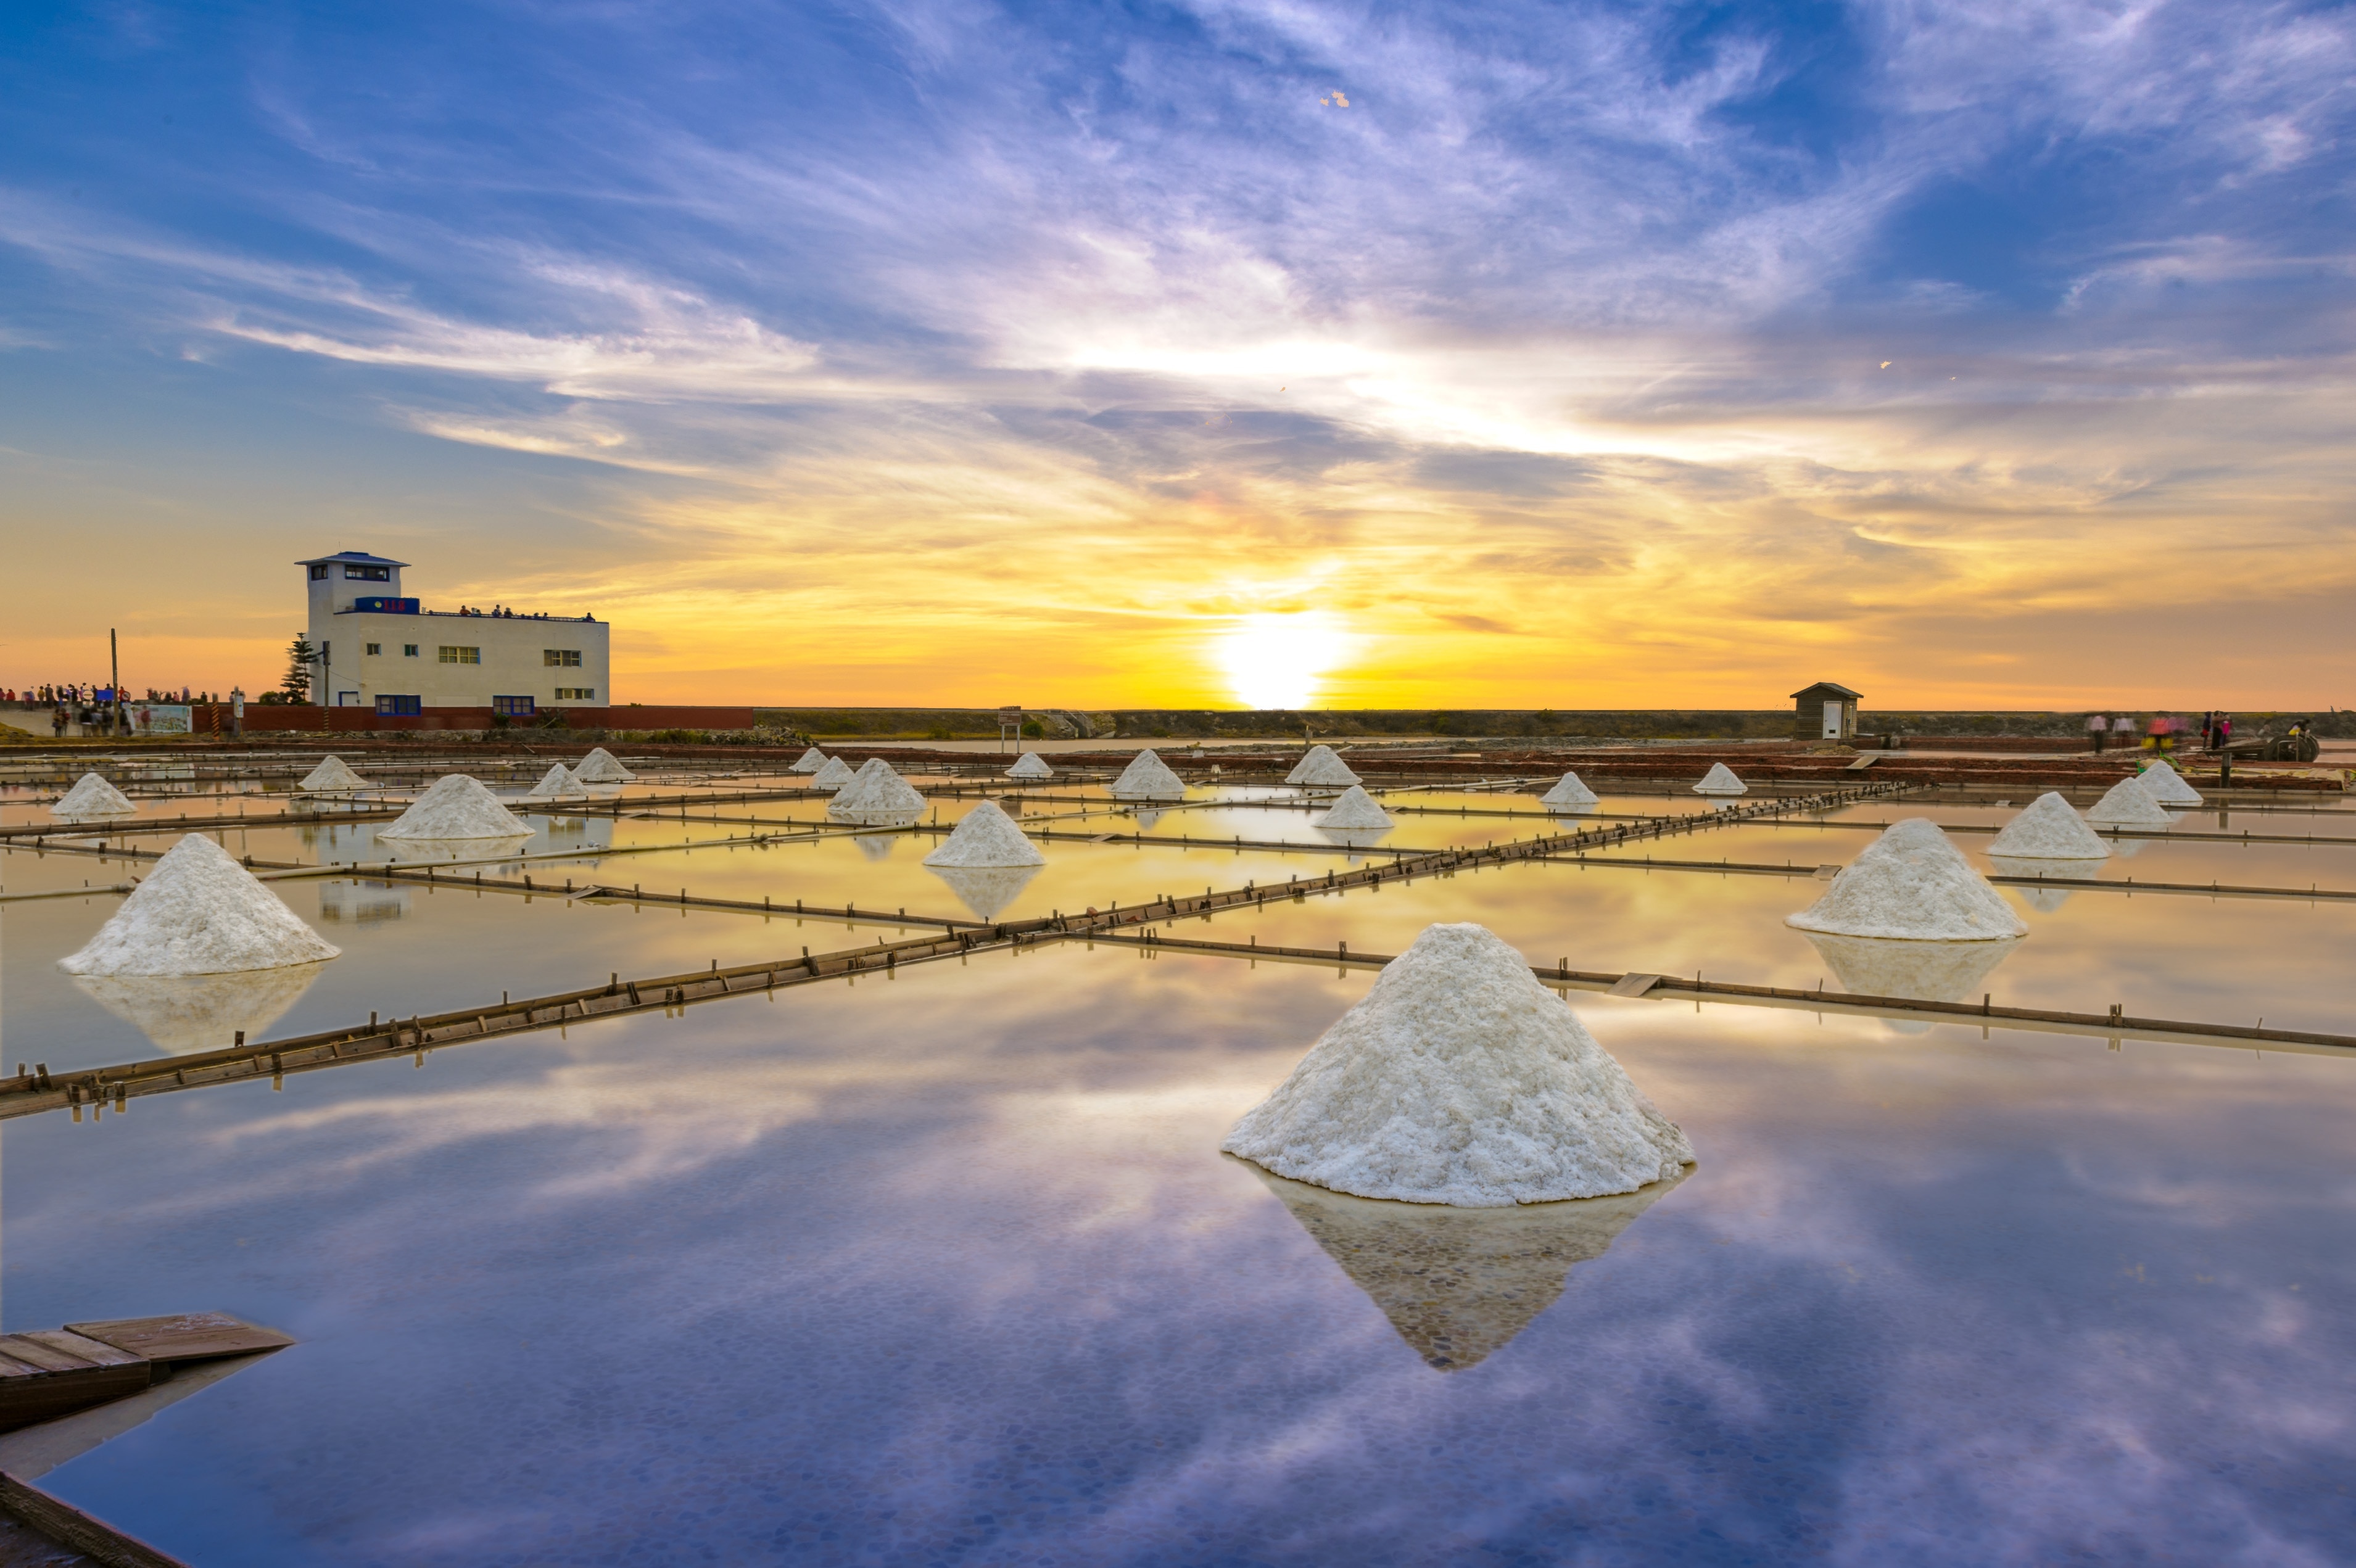 Jingzaijiao Tile-paved Salt Field Tours - Book Now | Expedia